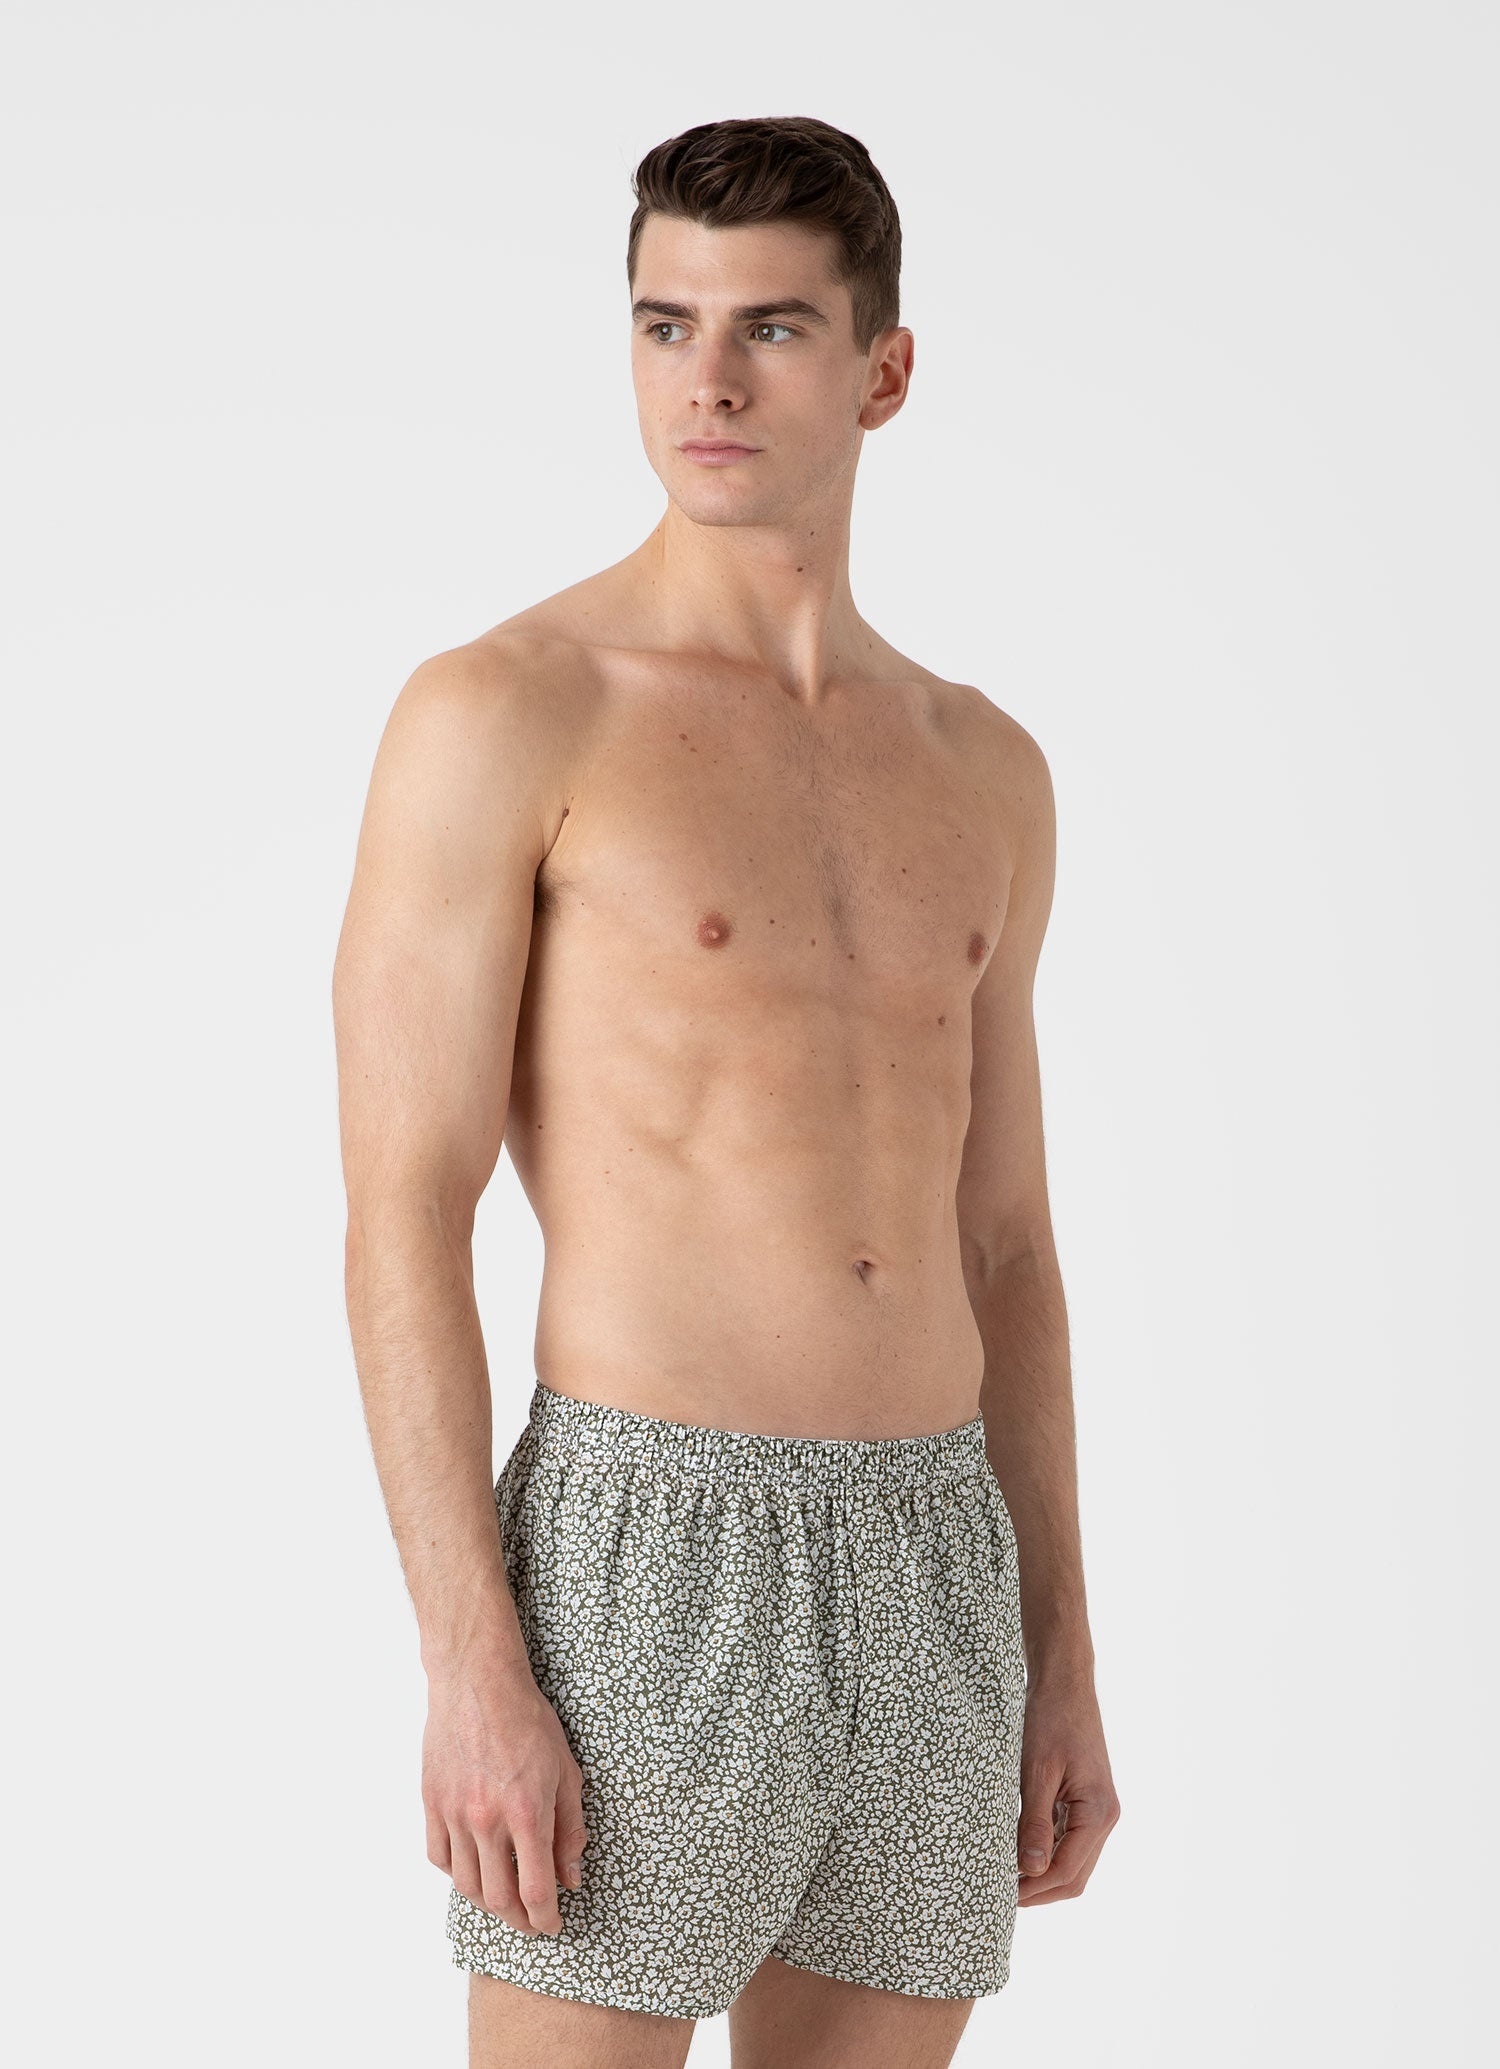 Classic Boxer Shorts in Liberty Fabric - 2